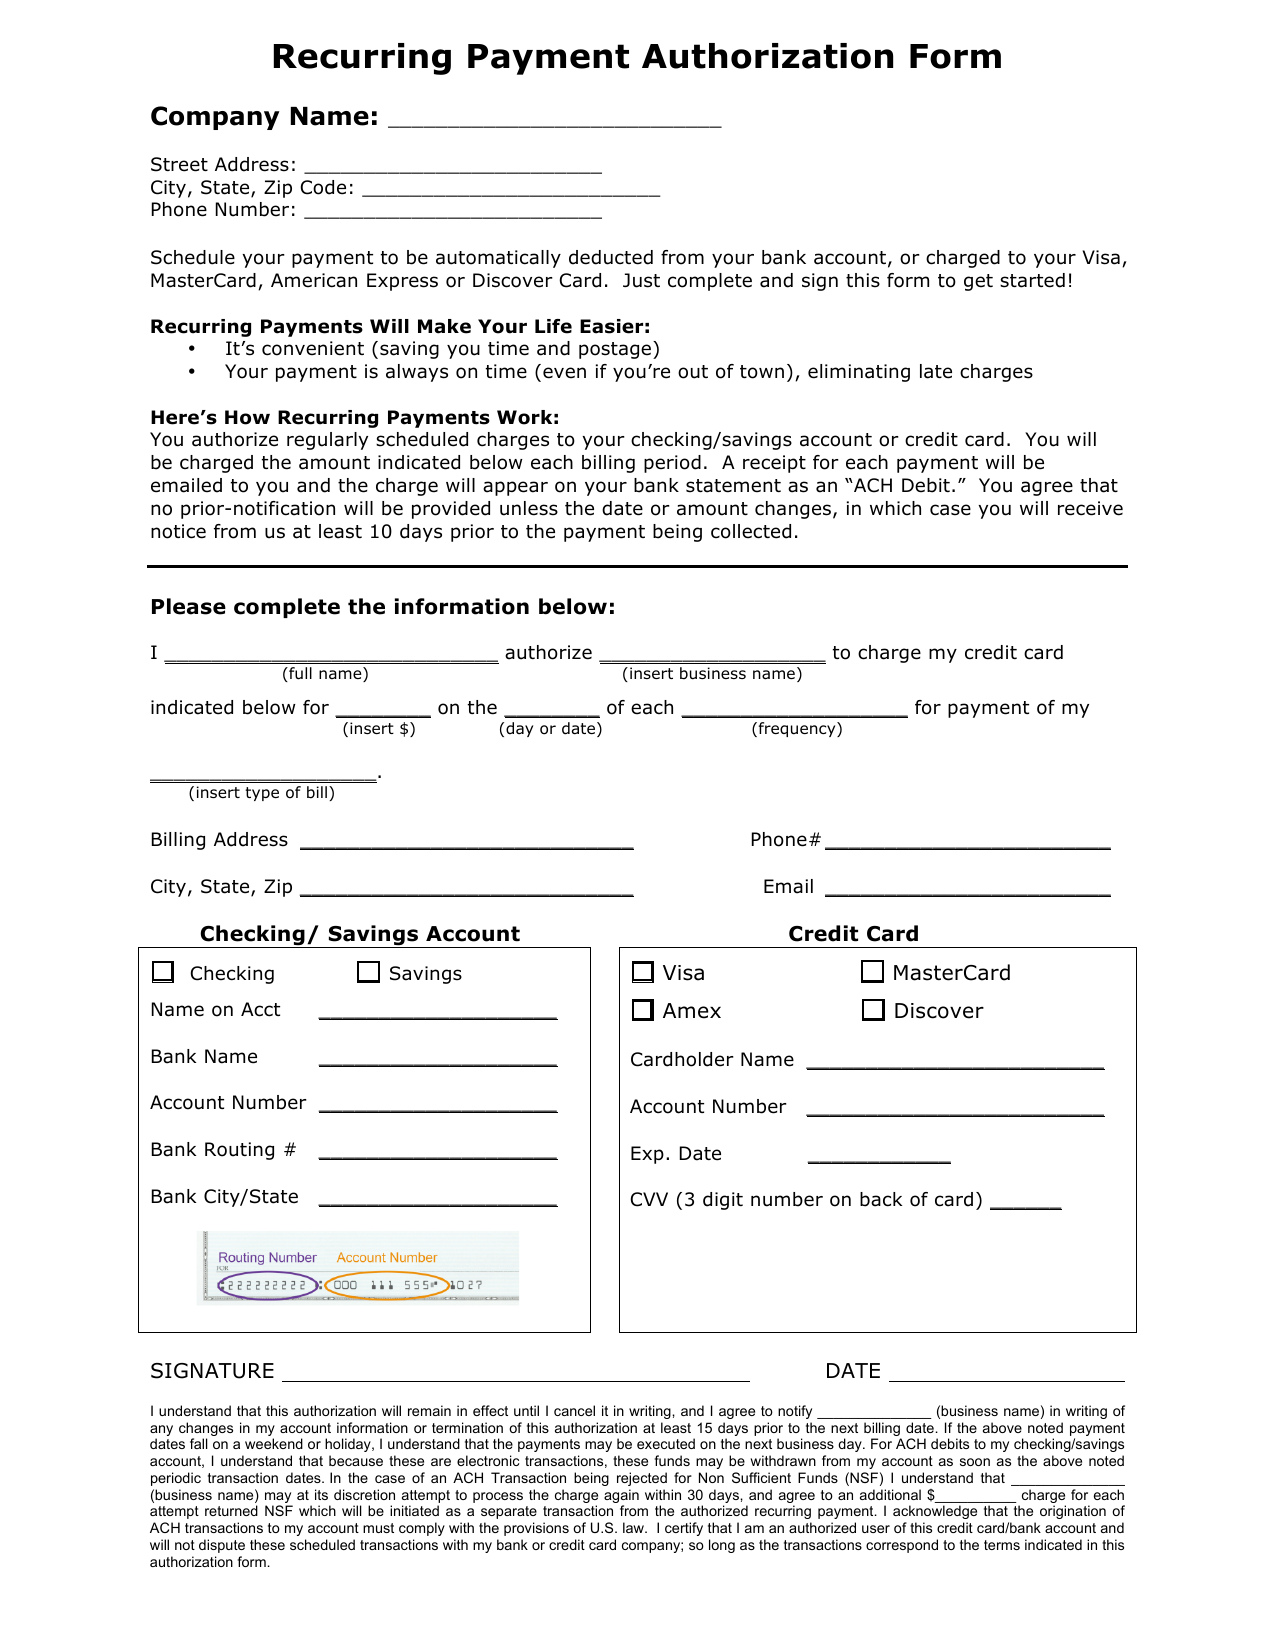 Download Recurring Payment Authorization Form Template | Credit Card